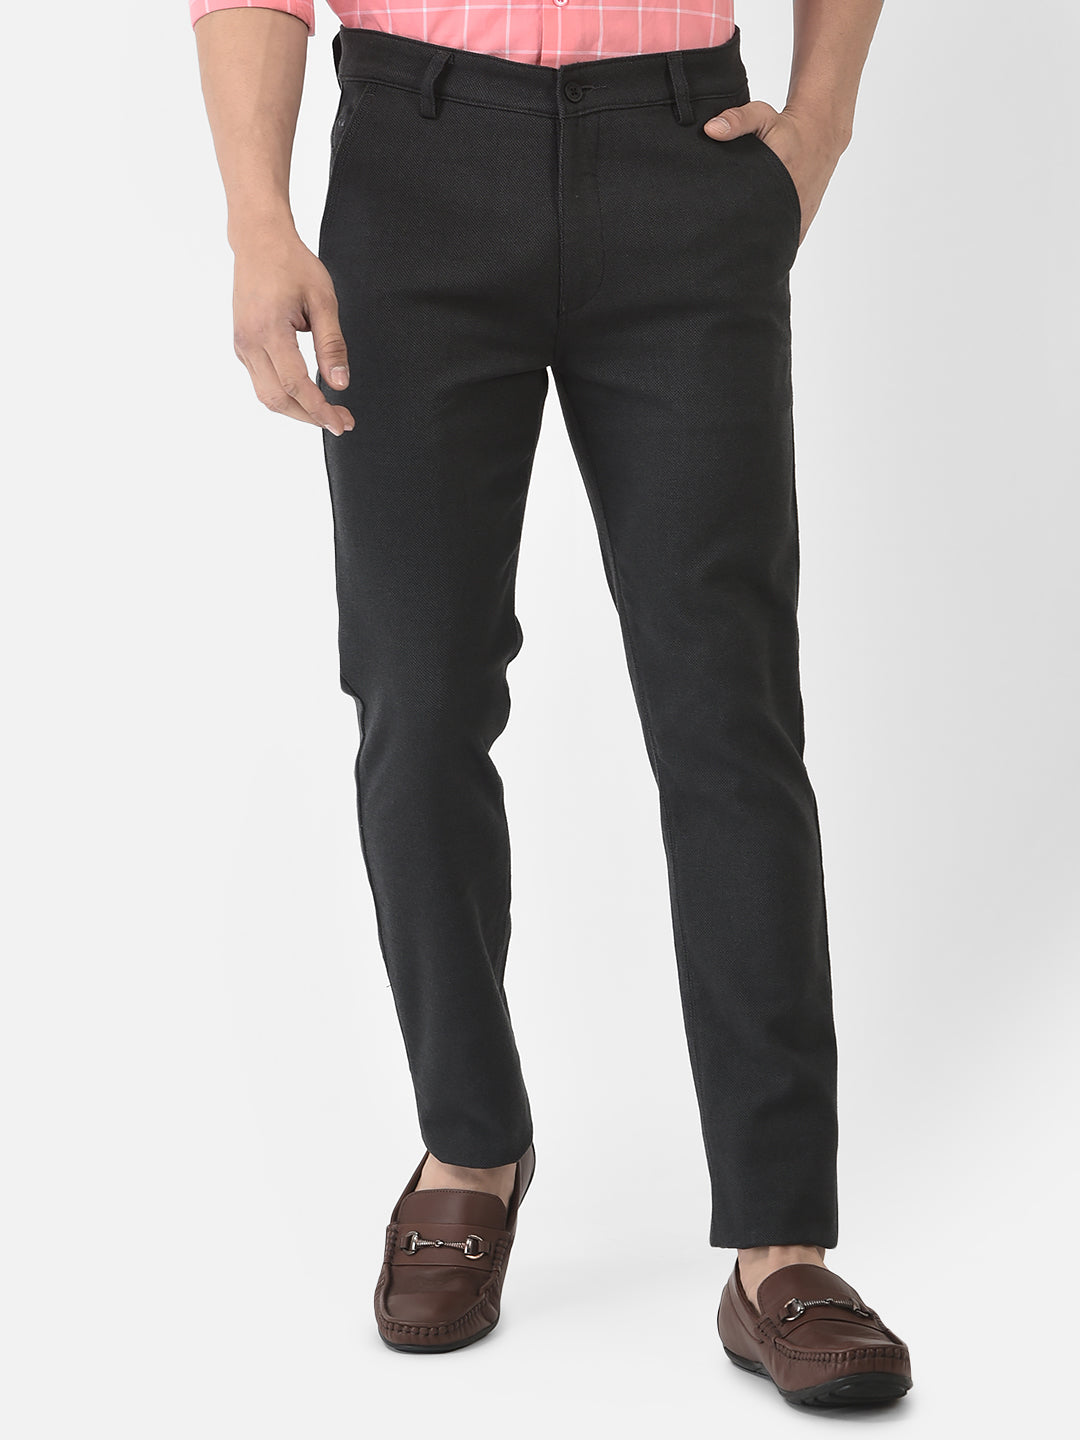  Dark Grey Trousers with Textured Print